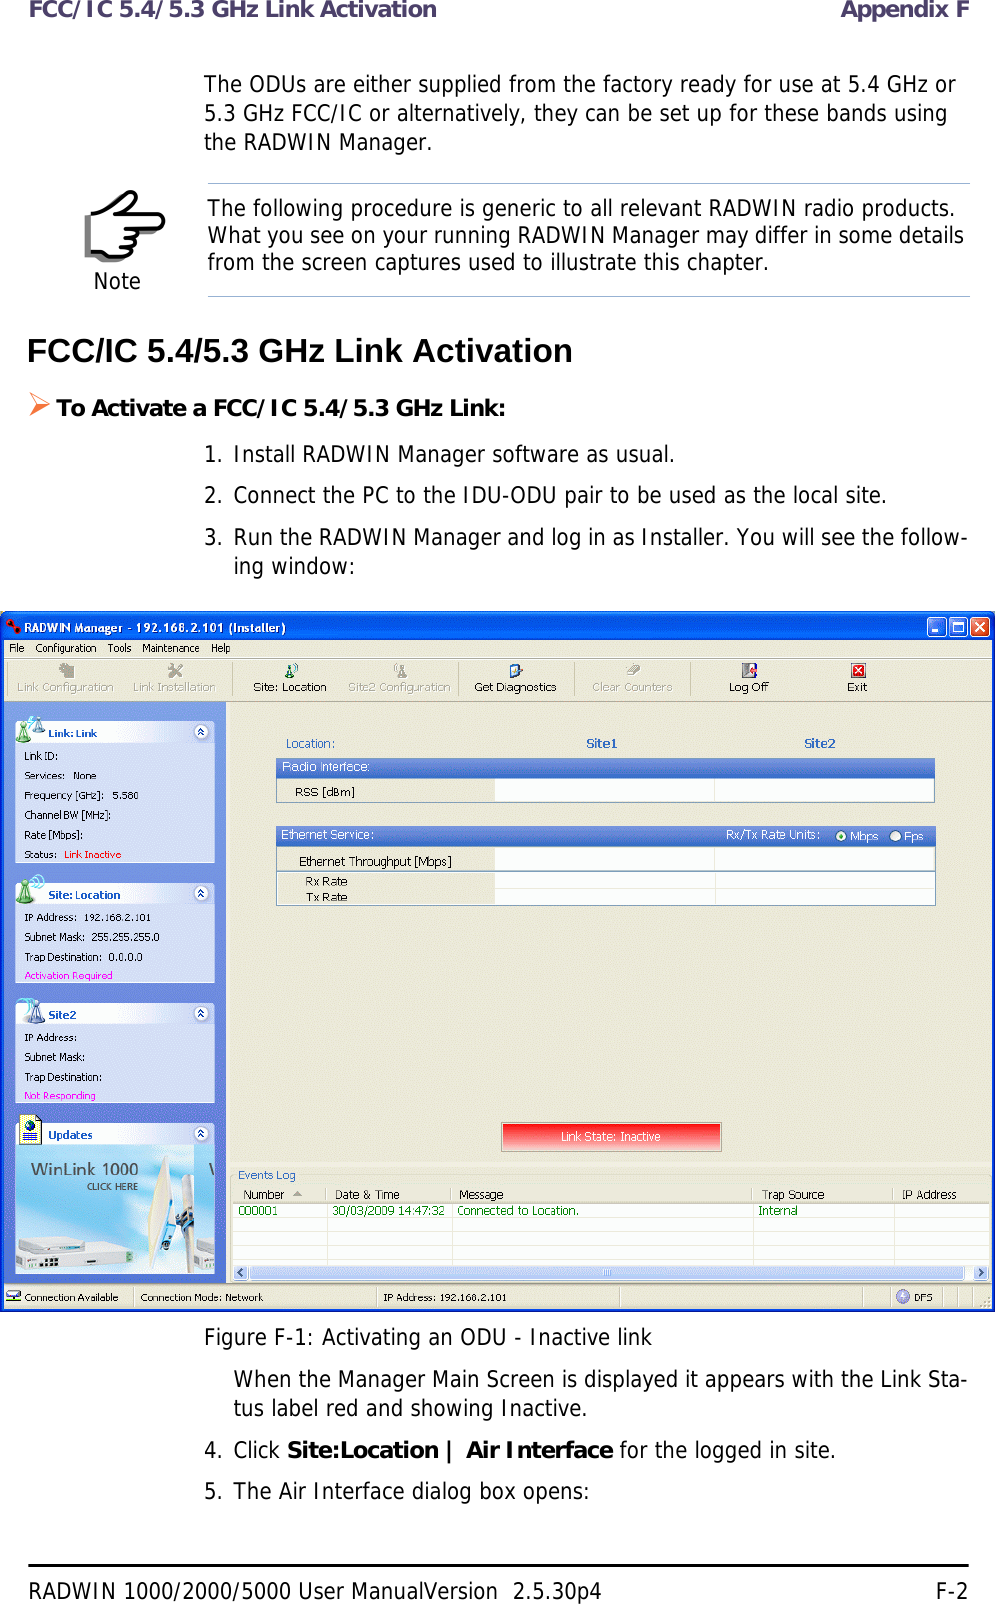 FCC/IC 5.4/5.3 GHz Link Activation Appendix FRADWIN 1000/2000/5000 User ManualVersion  2.5.30p4 F-2The ODUs are either supplied from the factory ready for use at 5.4 GHz or 5.3 GHz FCC/IC or alternatively, they can be set up for these bands using the RADWIN Manager.FCC/IC 5.4/5.3 GHz Link ActivationTo Activate a FCC/IC 5.4/5.3 GHz Link:1. Install RADWIN Manager software as usual.2. Connect the PC to the IDU-ODU pair to be used as the local site.3. Run the RADWIN Manager and log in as Installer. You will see the follow-ing window:Figure F-1: Activating an ODU - Inactive linkWhen the Manager Main Screen is displayed it appears with the Link Sta-tus label red and showing Inactive.4. Click Site:Location | Air Interface for the logged in site.5. The Air Interface dialog box opens:NoteThe following procedure is generic to all relevant RADWIN radio products. What you see on your running RADWIN Manager may differ in some details from the screen captures used to illustrate this chapter.